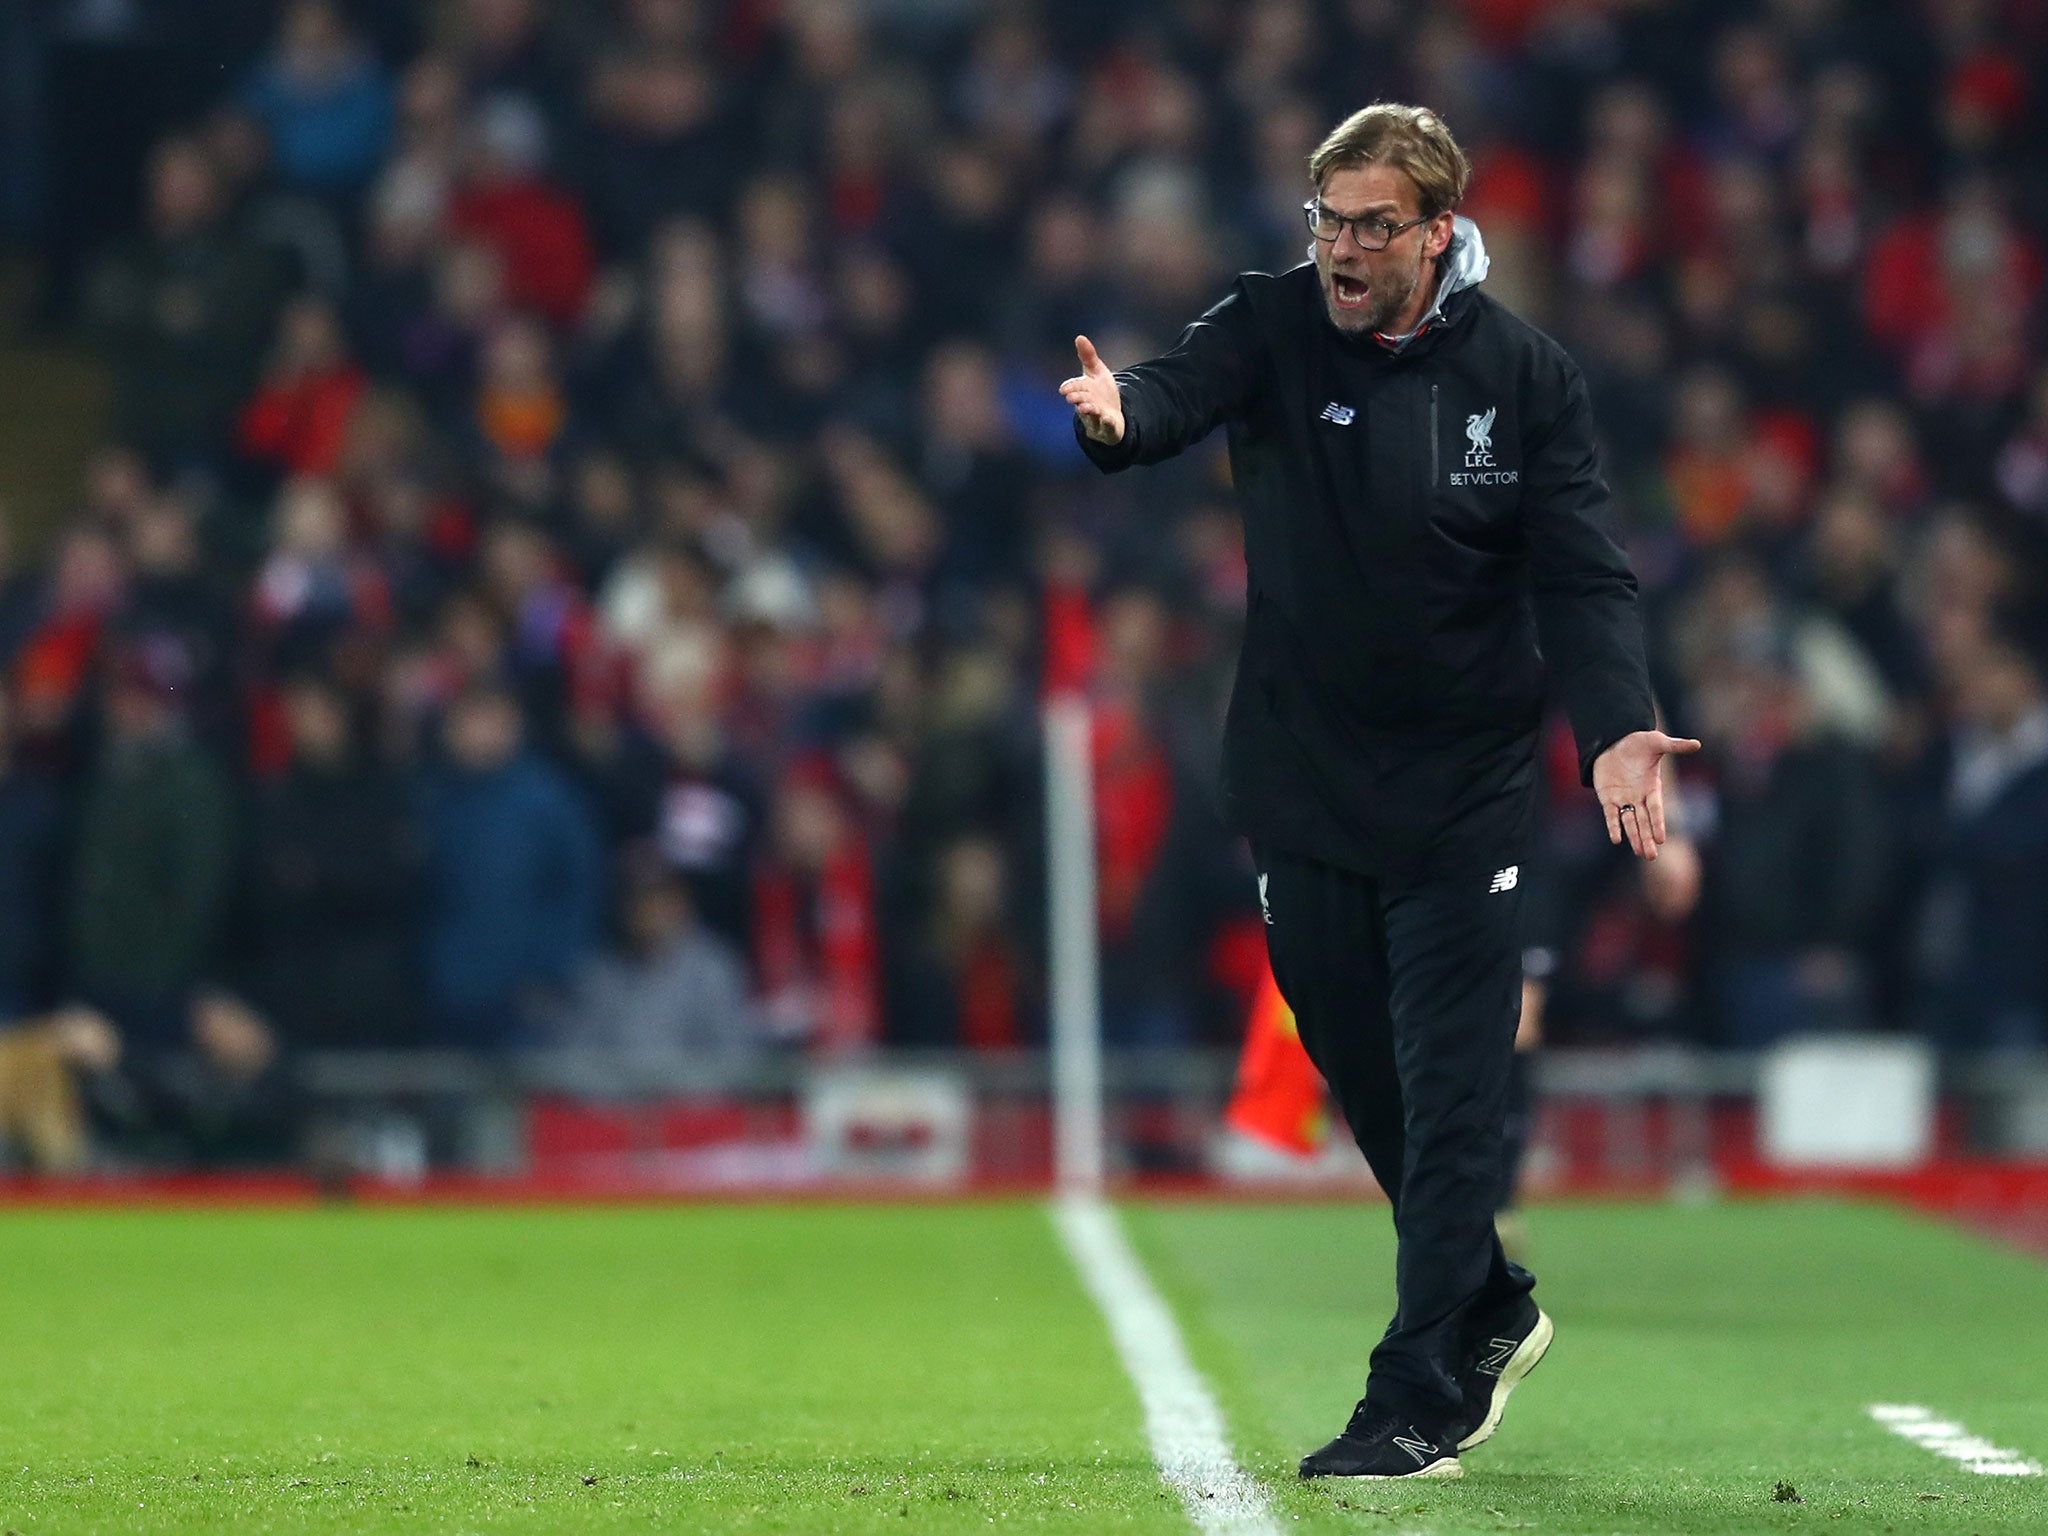 Jurgen Klopp struck an animated, and at times frustrated, figure on the touchline